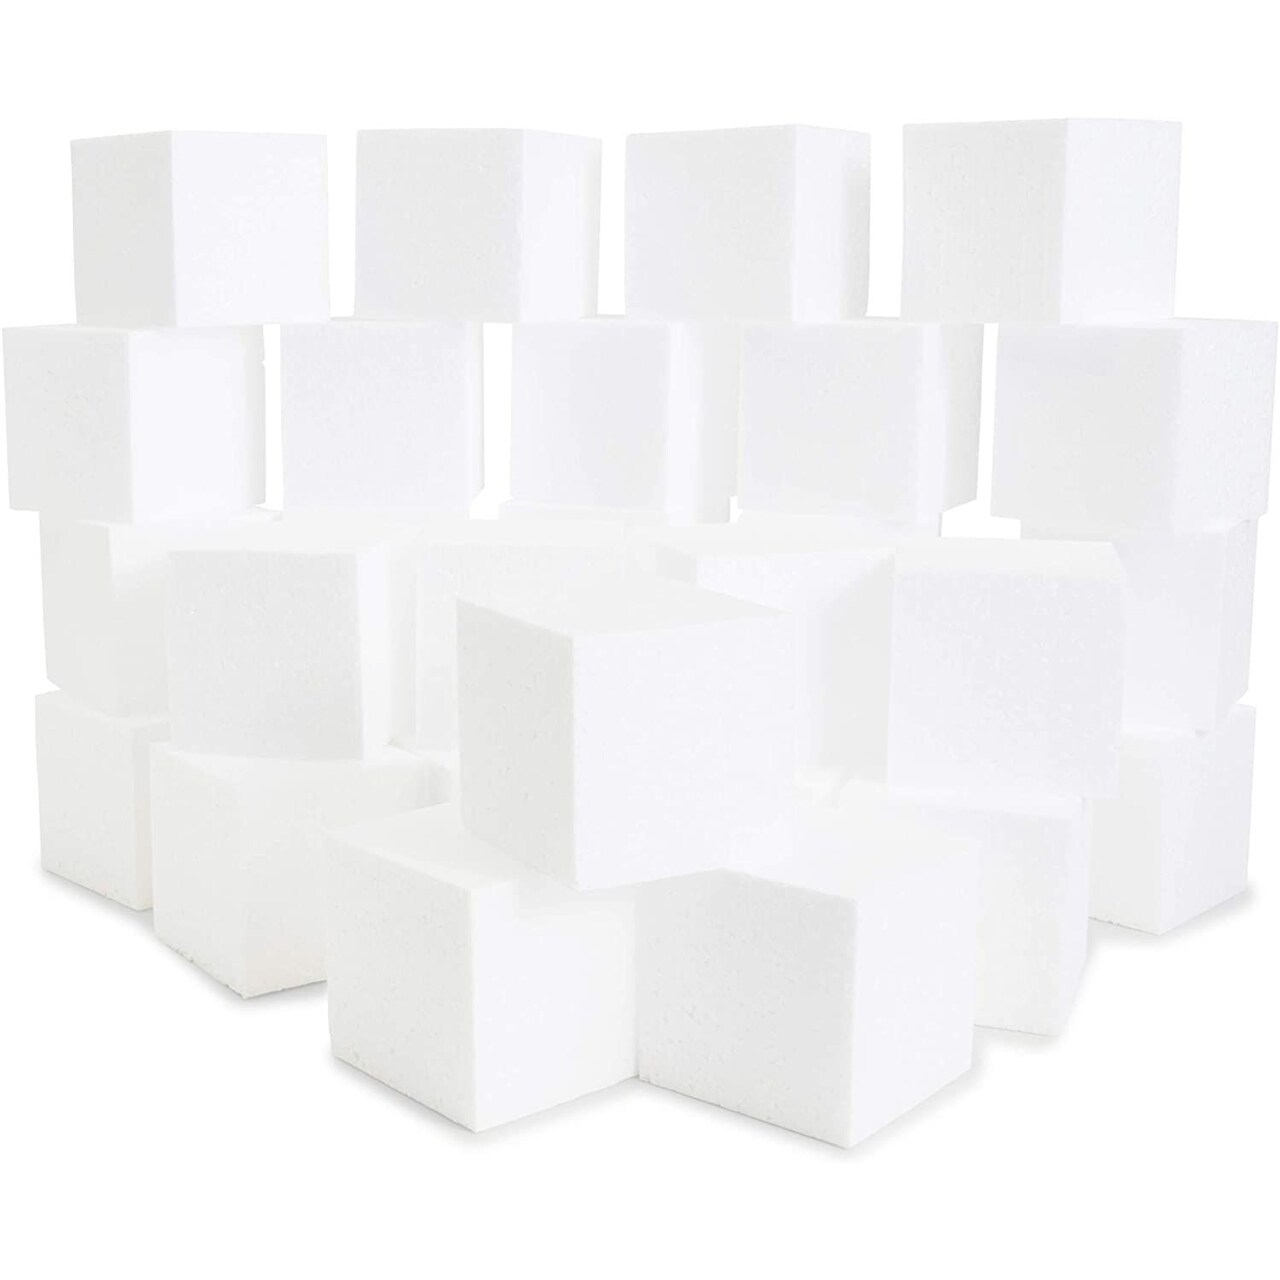 30 Pack Foam Craft Blocks for Modeling, 3 Inch Mini Square Cubes for  Sculpting, School Projects (White Polystrene)